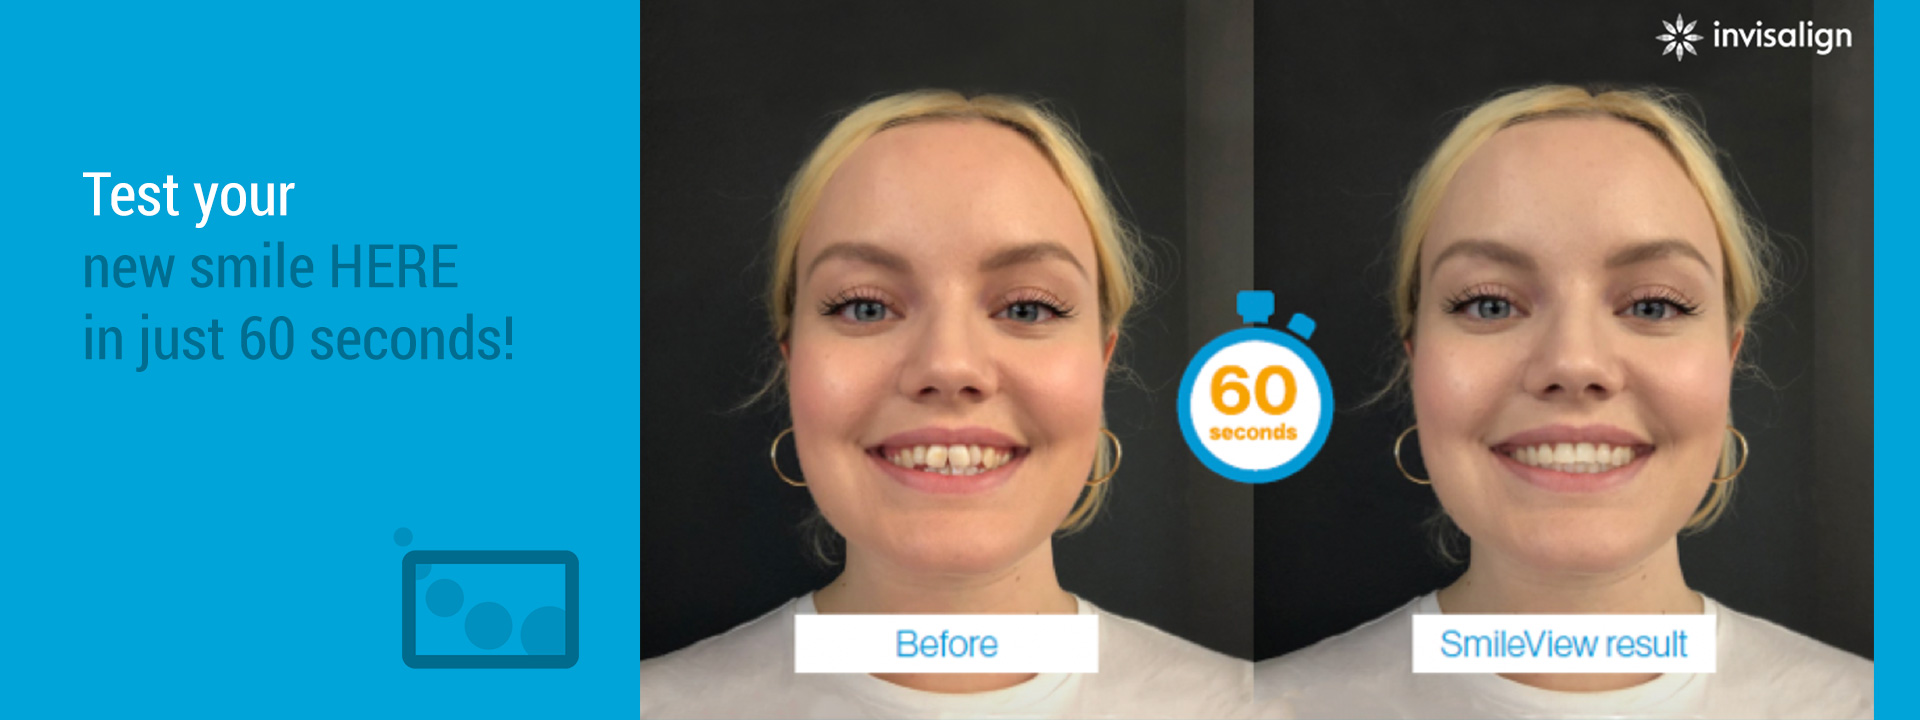 Smileview: Try your new smile in just 60 seconds